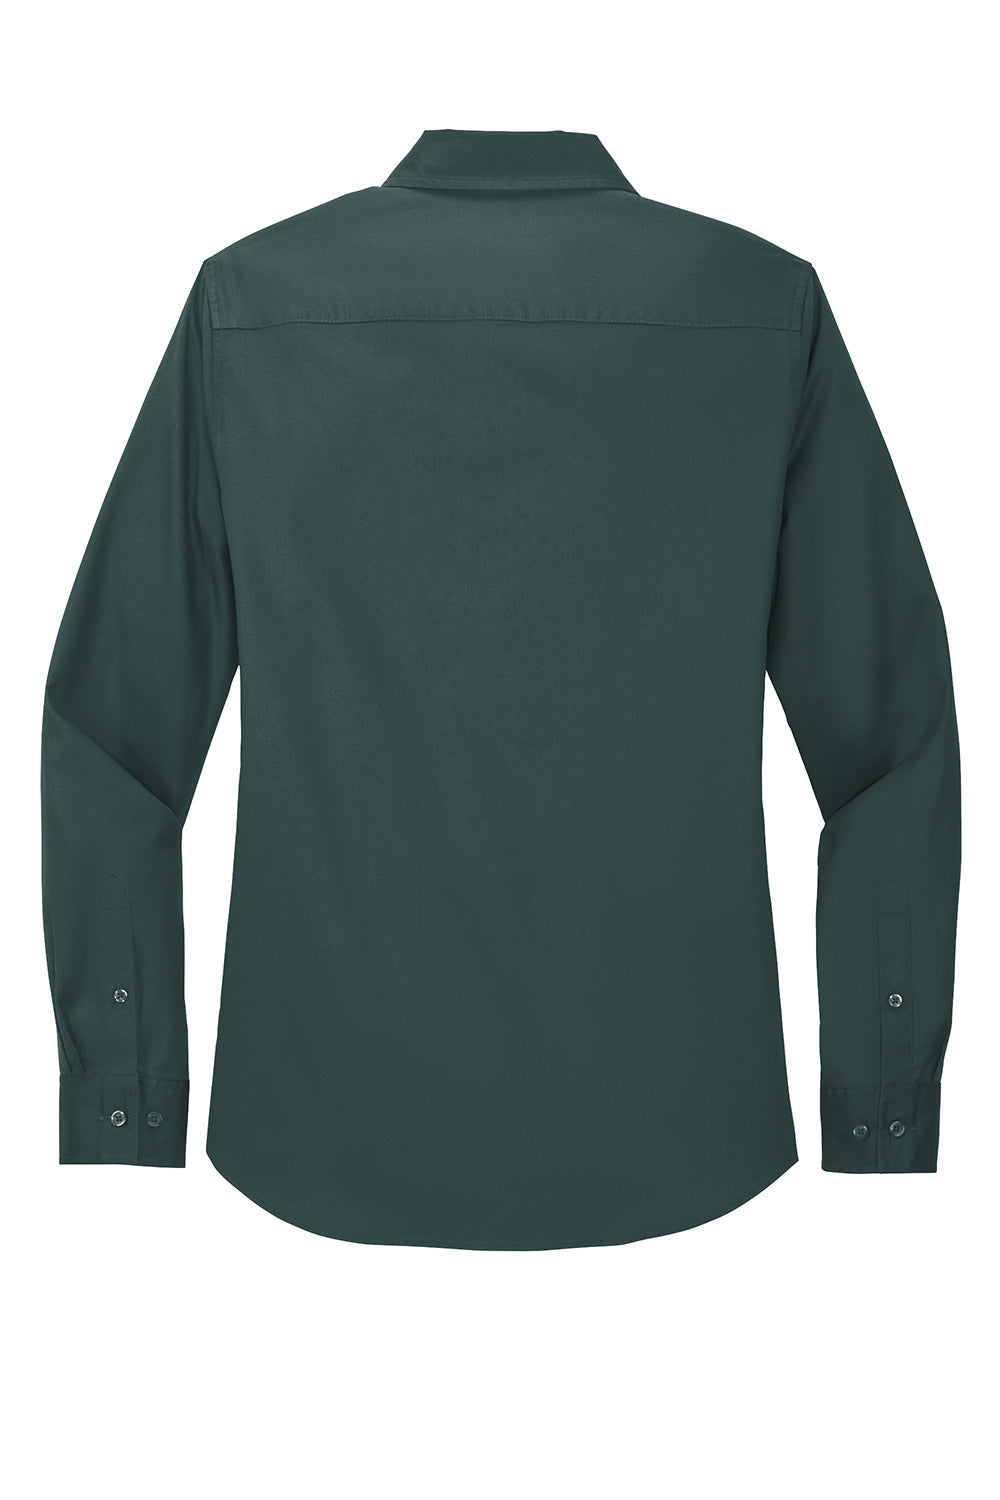 Port Authority L608 Womens Easy Care Wrinkle Resistant Long Sleeve Button Down Shirt Dark Green Flat Back